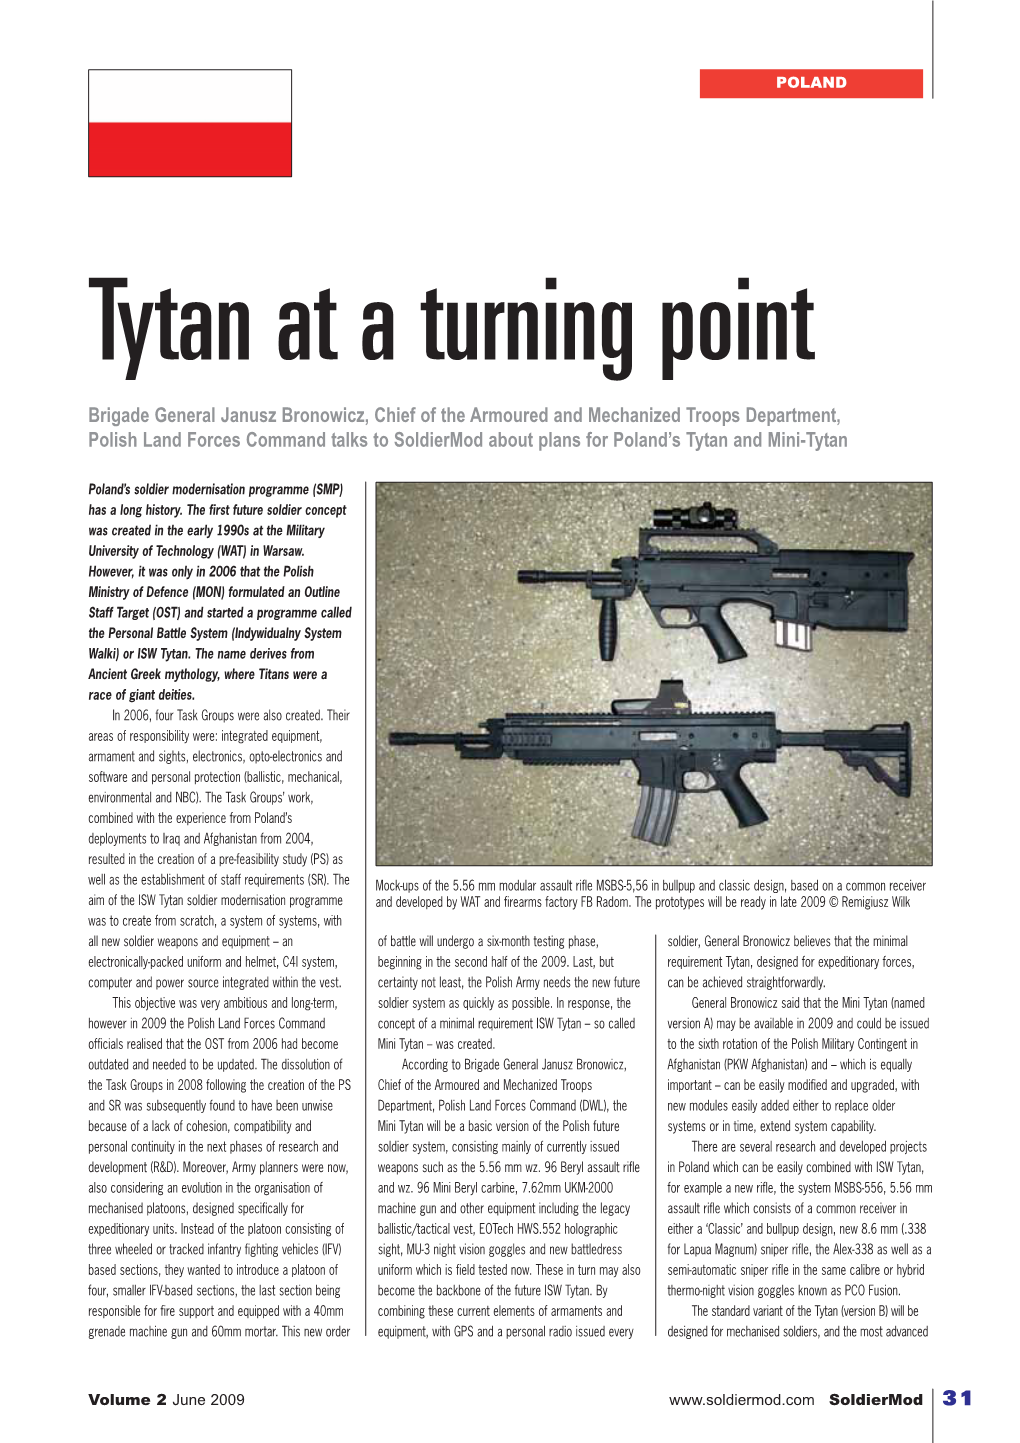 Tytan at a Turning Point